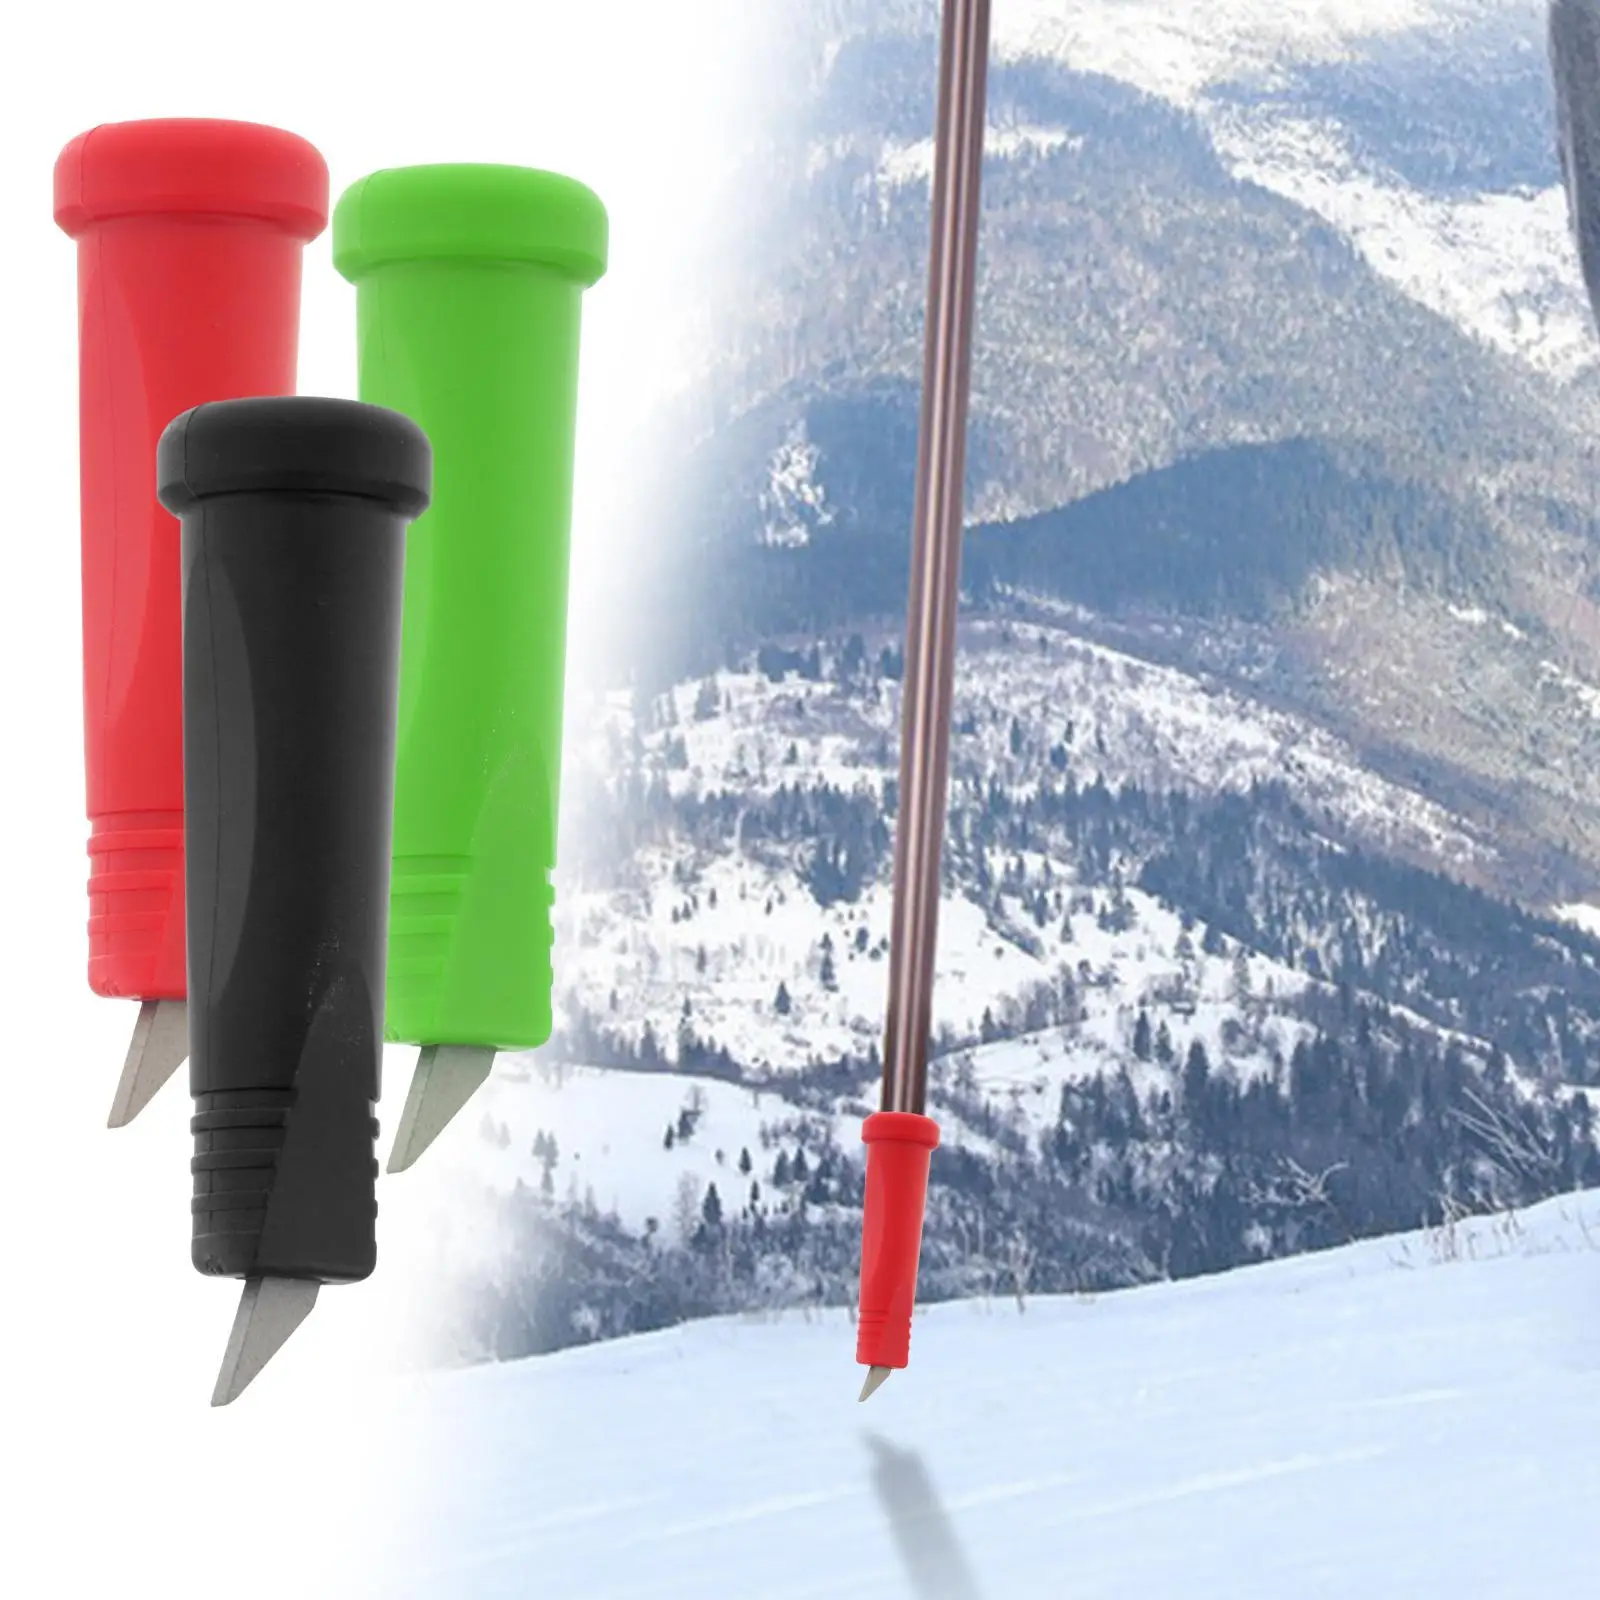 Alpenstock Tip Walking Pole Feet Tips Accessory 8cm Portable Trekking Pole Accessory for Camping Hiking Cane Stick Walking